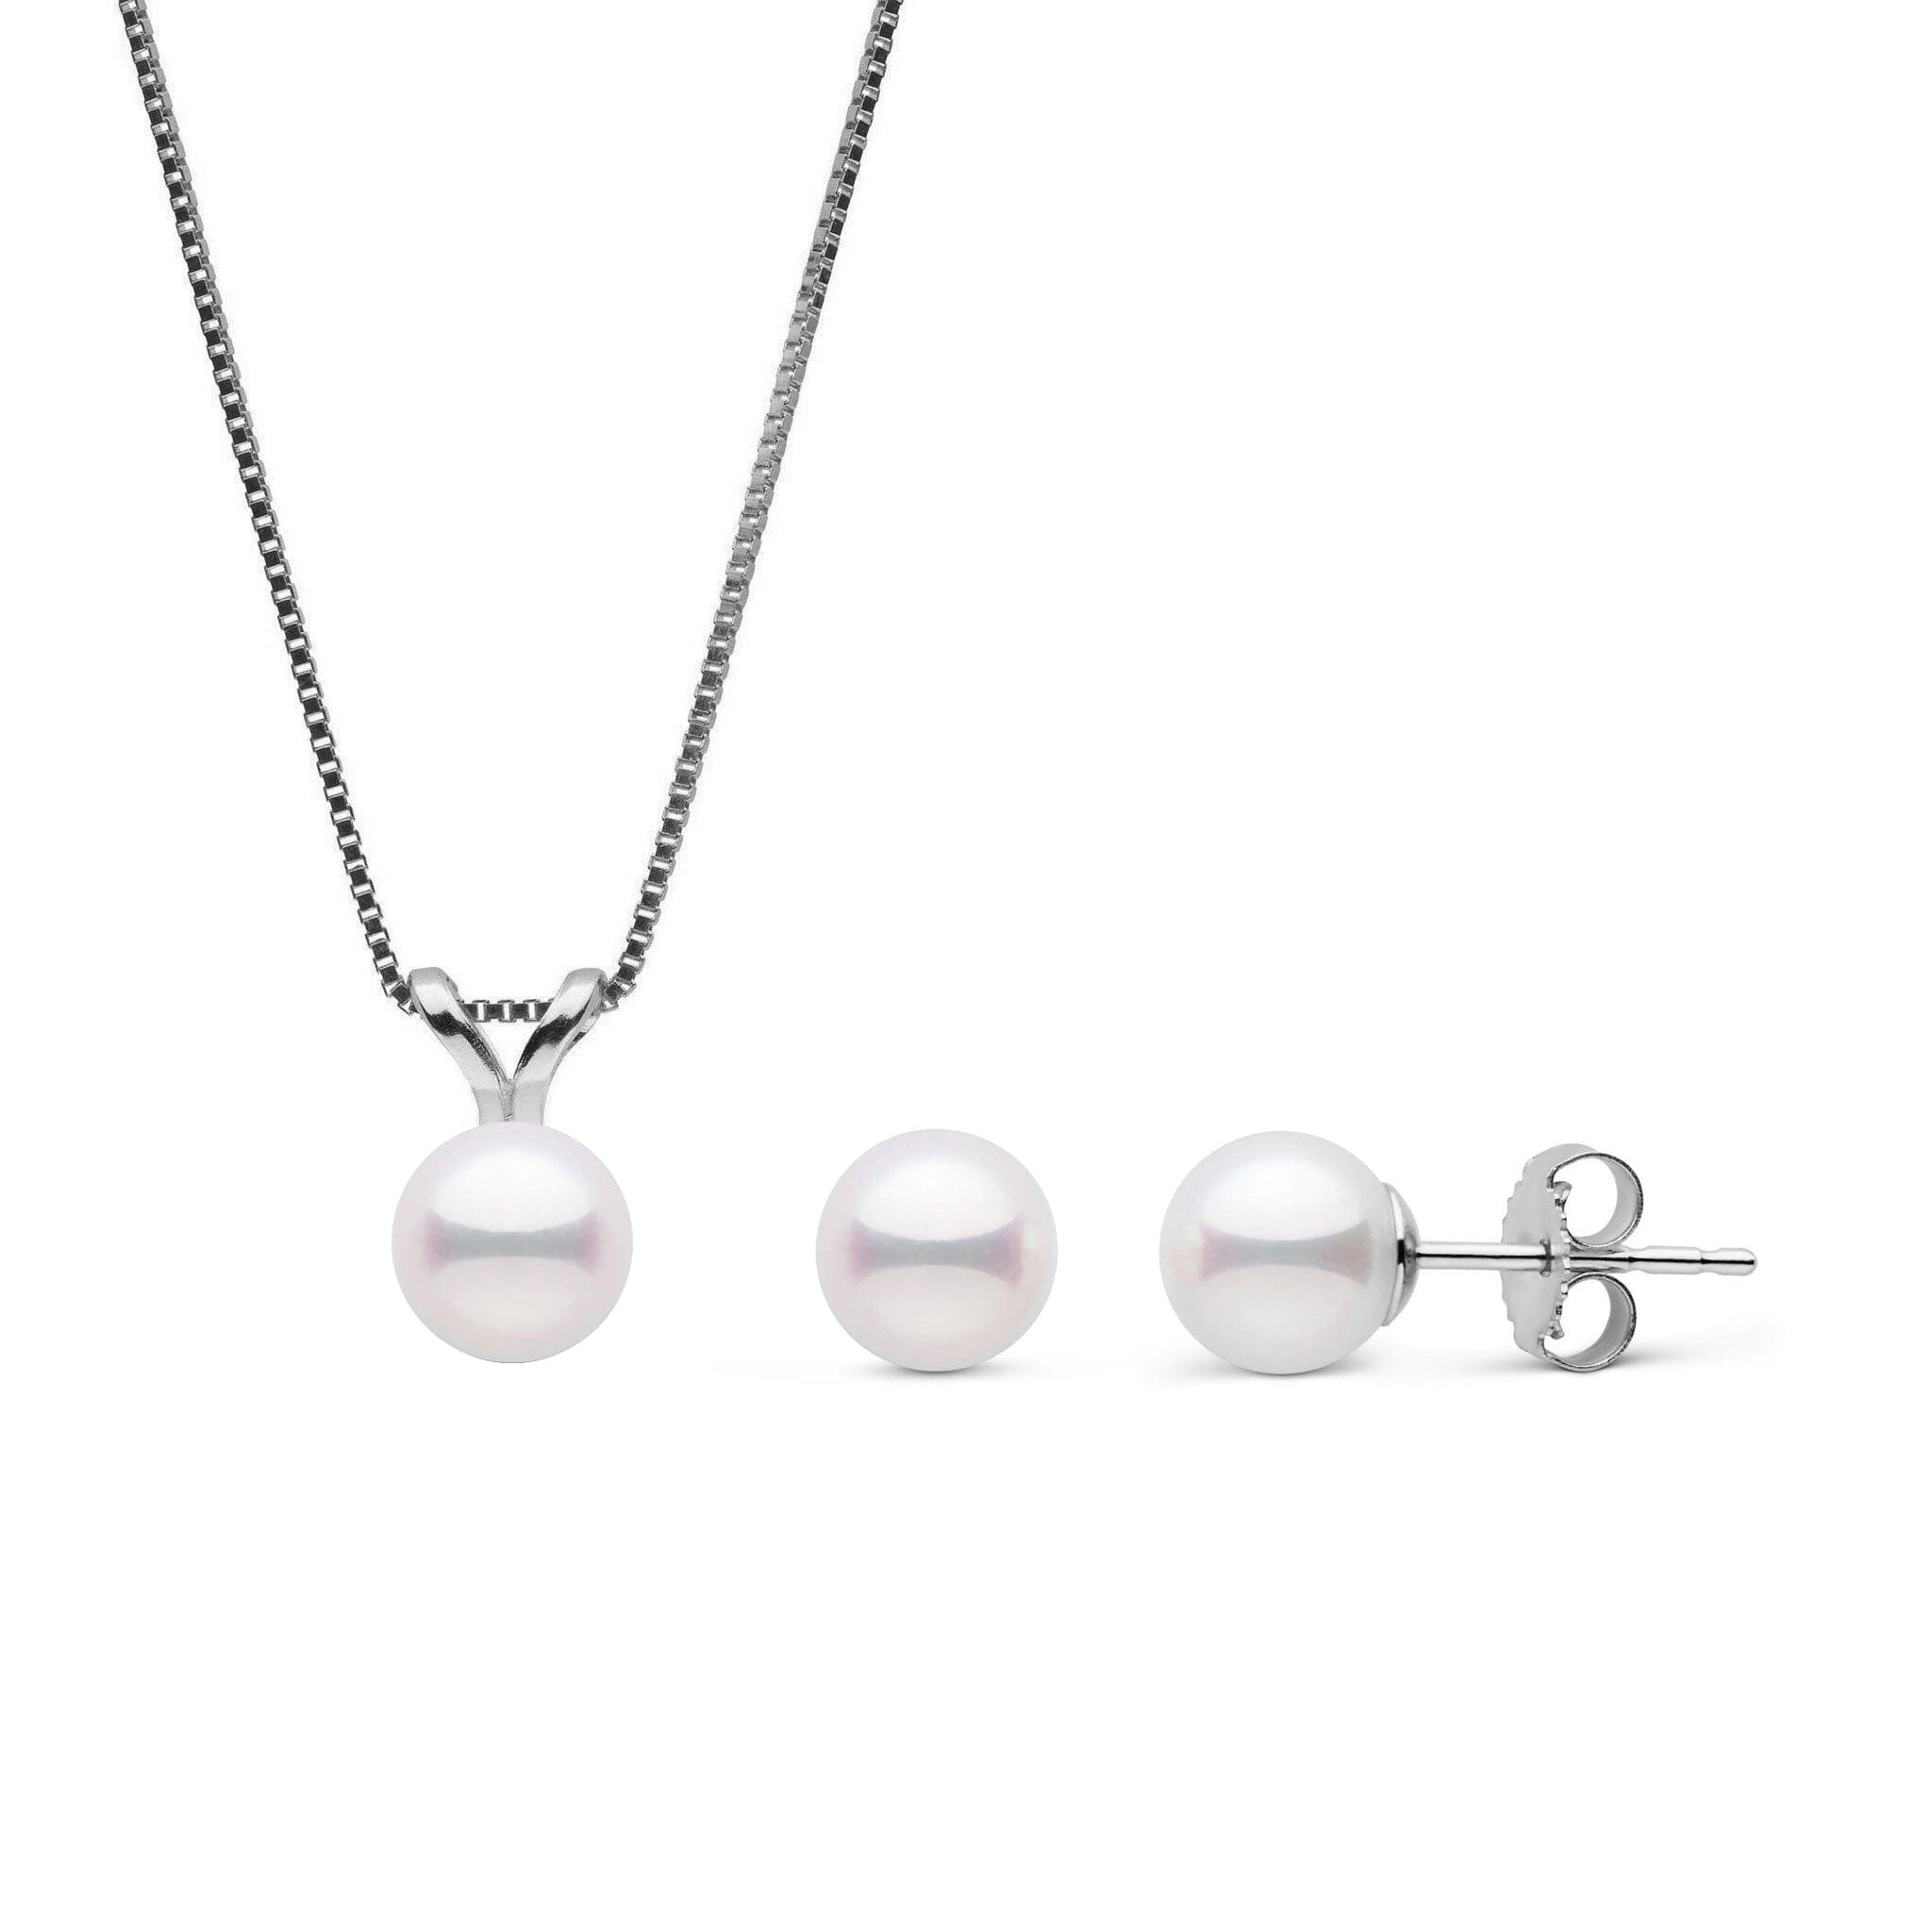 6.0-6.5 mm Akoya Pearl Unity Collection Pendant and Earrings Set